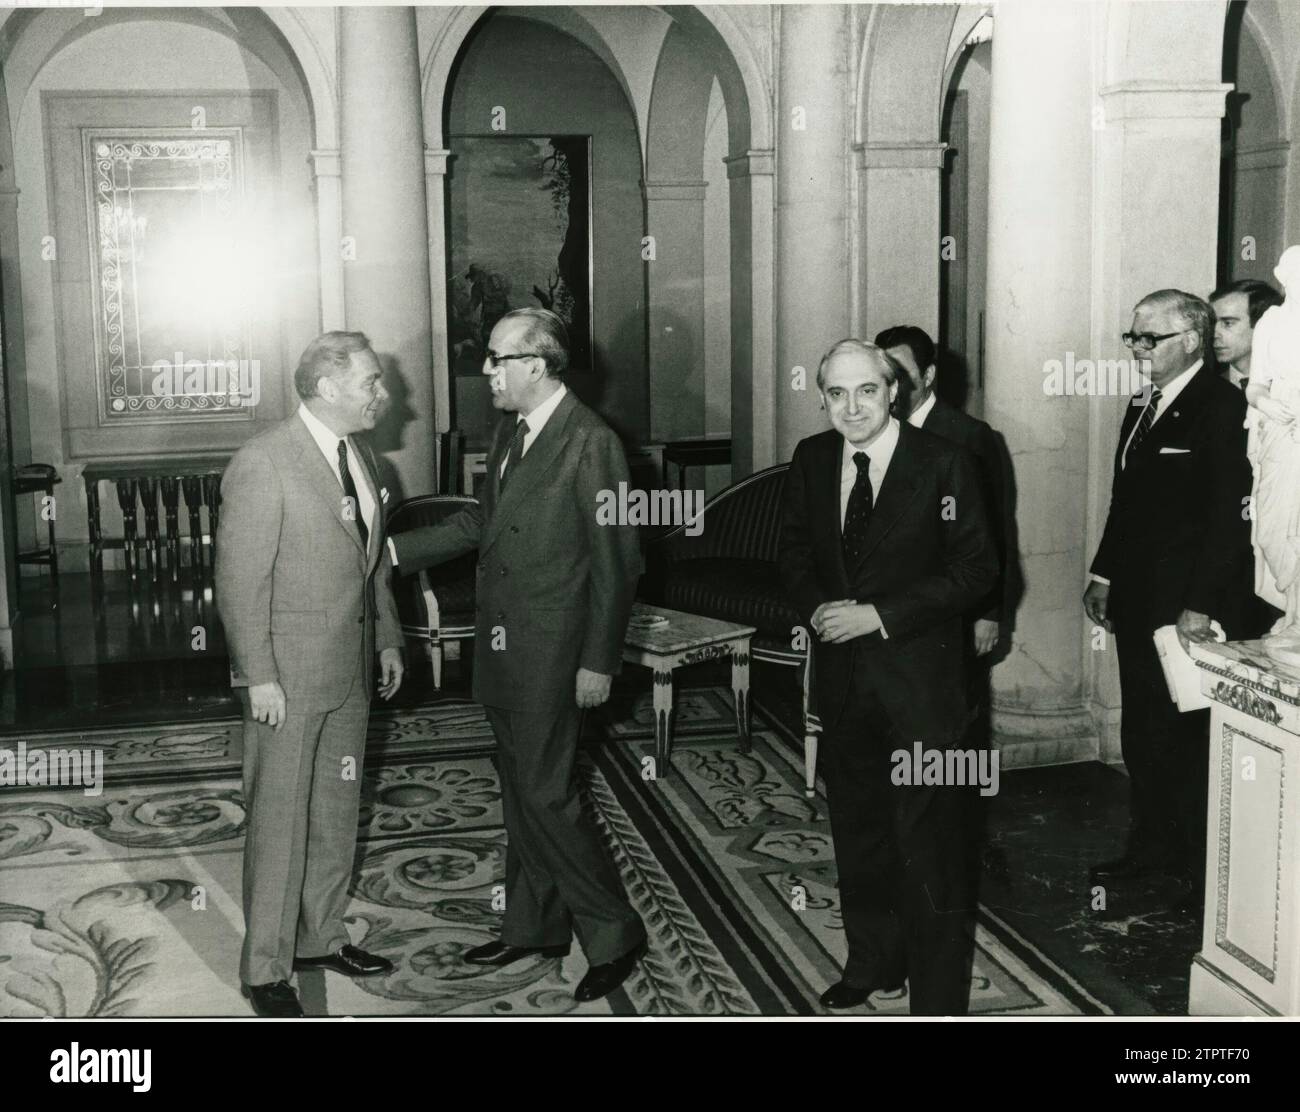 MADRID, 4/10/1981.- The president of the government, Leopoldo Calvo Sotelo, receives the Secretary of States of the United States, General Alexander Haig, accompanied by the Minister of Foreign Affairs, José Pedro Pérez Llorca. Credit: Album / Archivo ABC Stock Photo